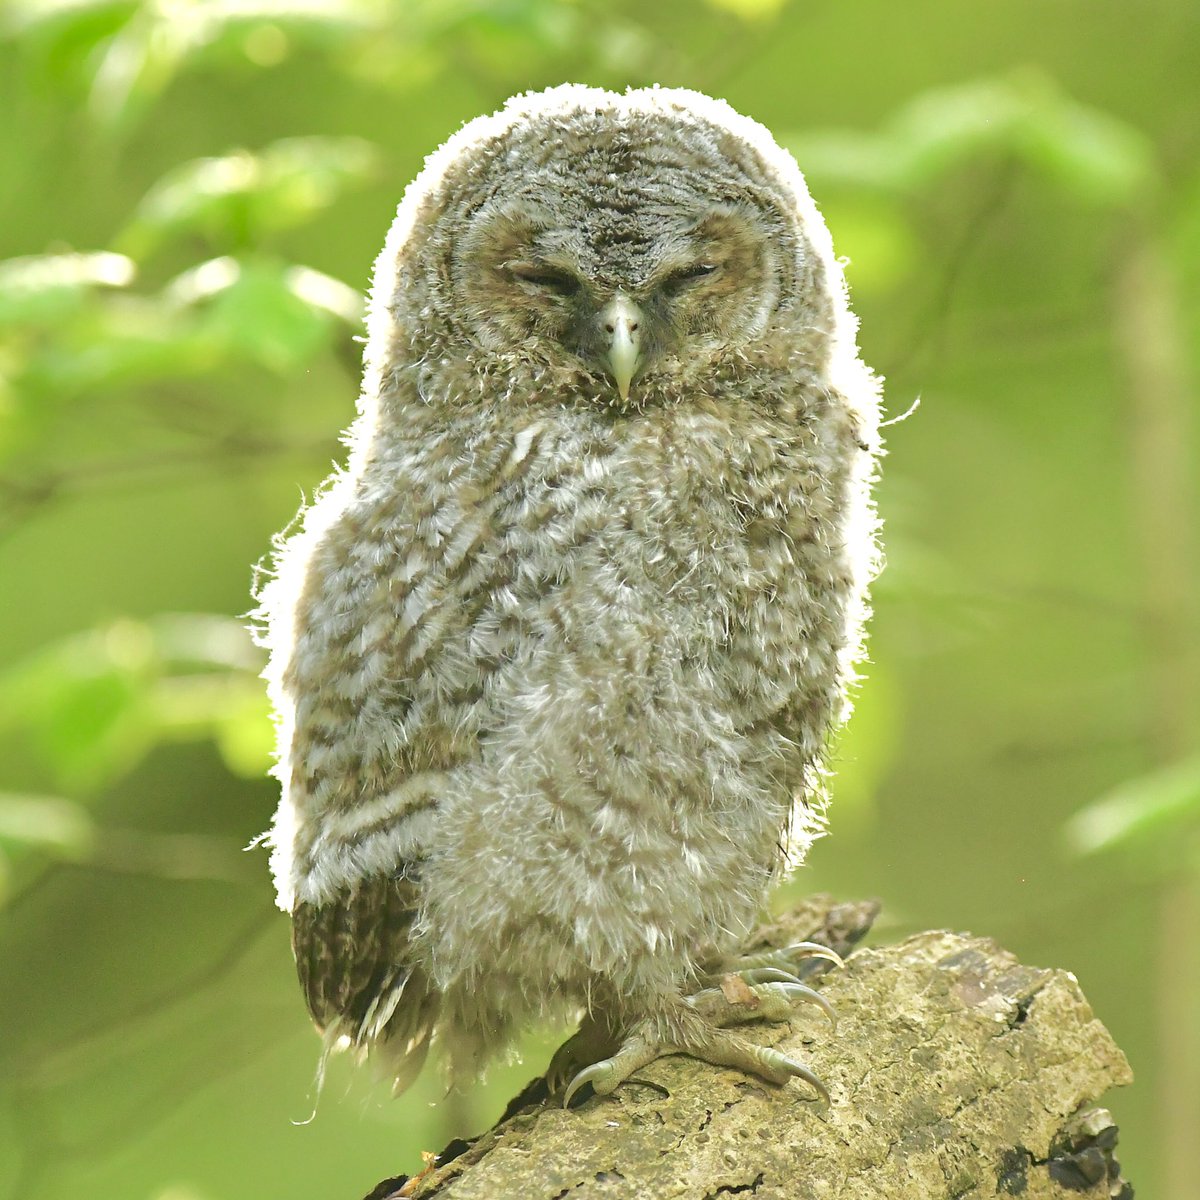 One year since I came across this Tawny Owlet in Mitchley Wood. I wonder how it’s doing in life